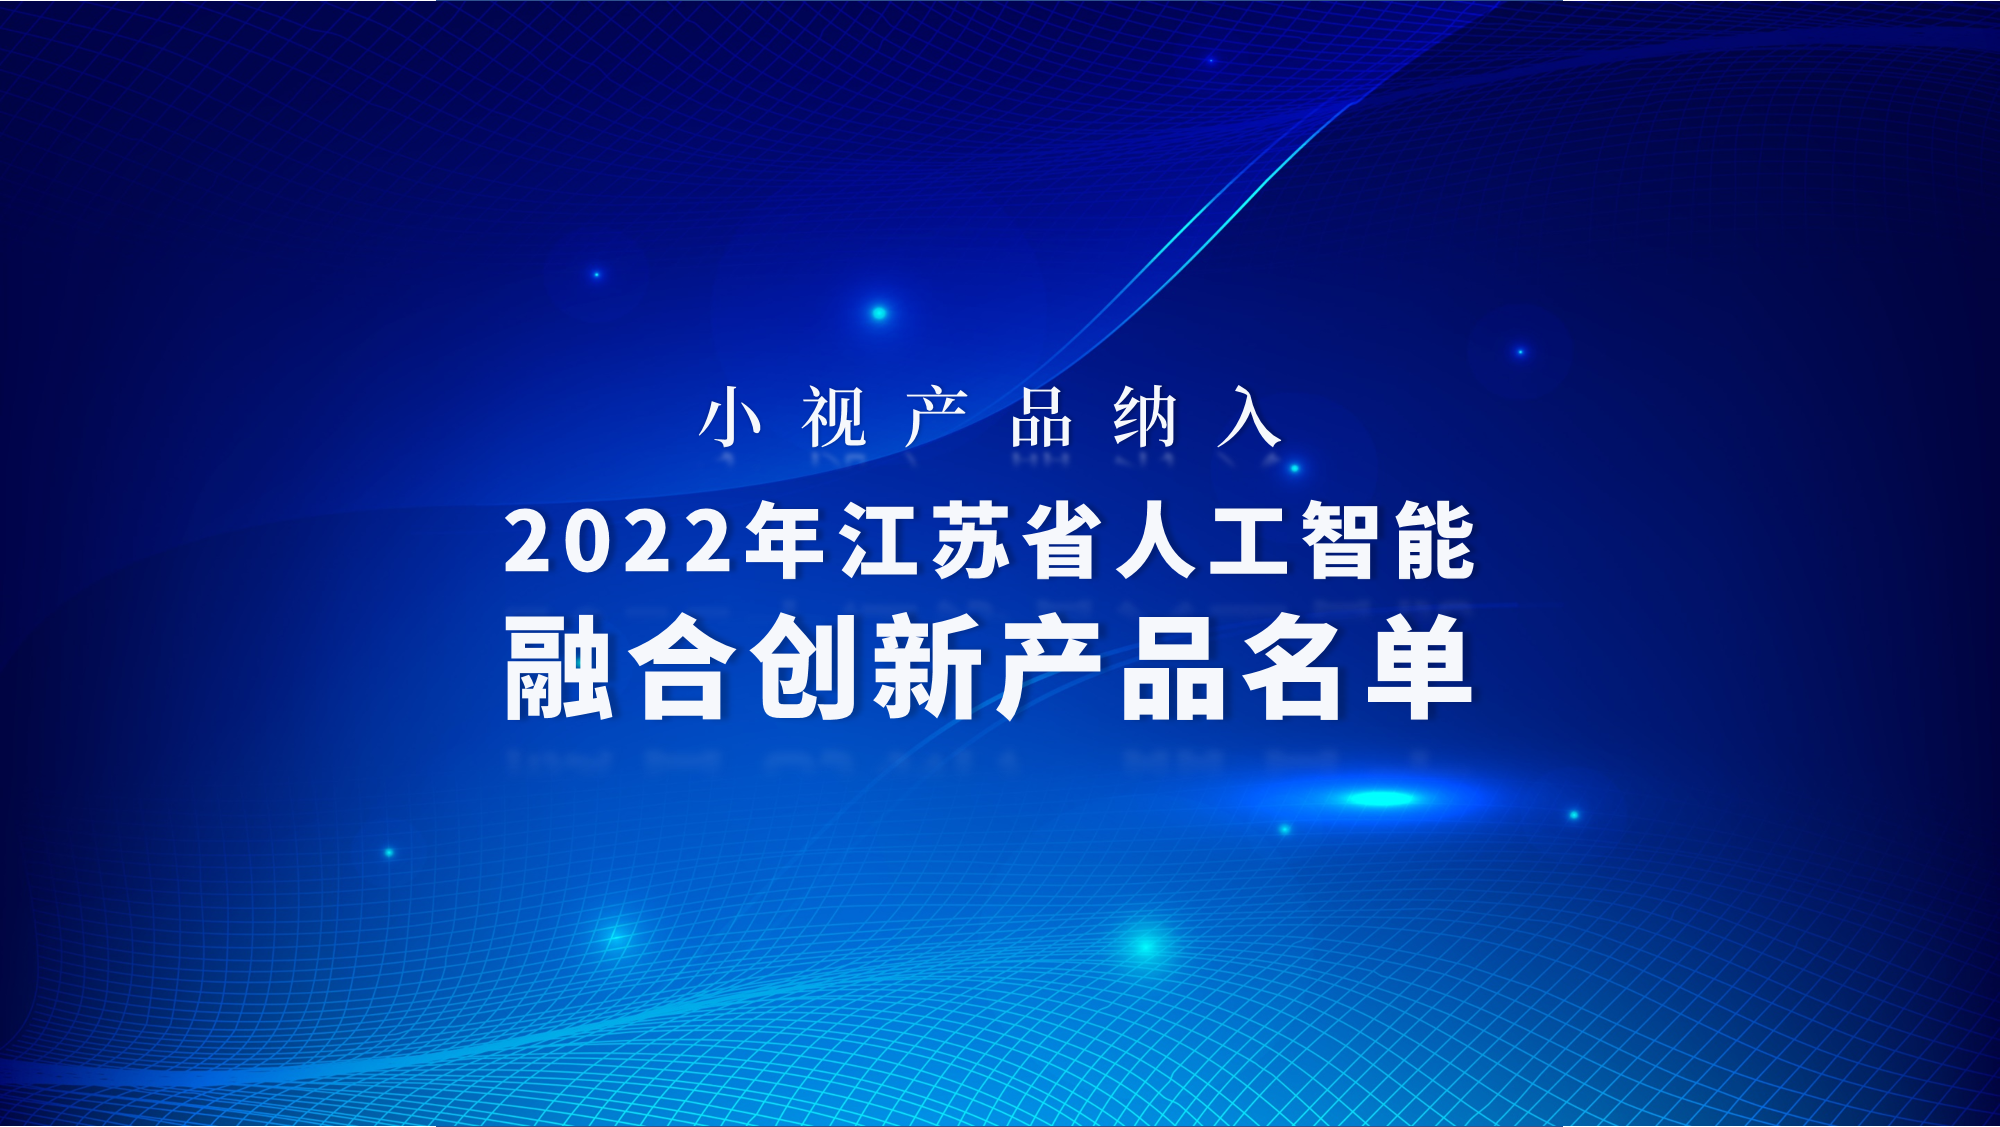 Minivision products are included in the 2022 Jiangsu Province Artificial Intelligence Integration Innovation Product List, consolidating the foundation of intelligent service capabilities